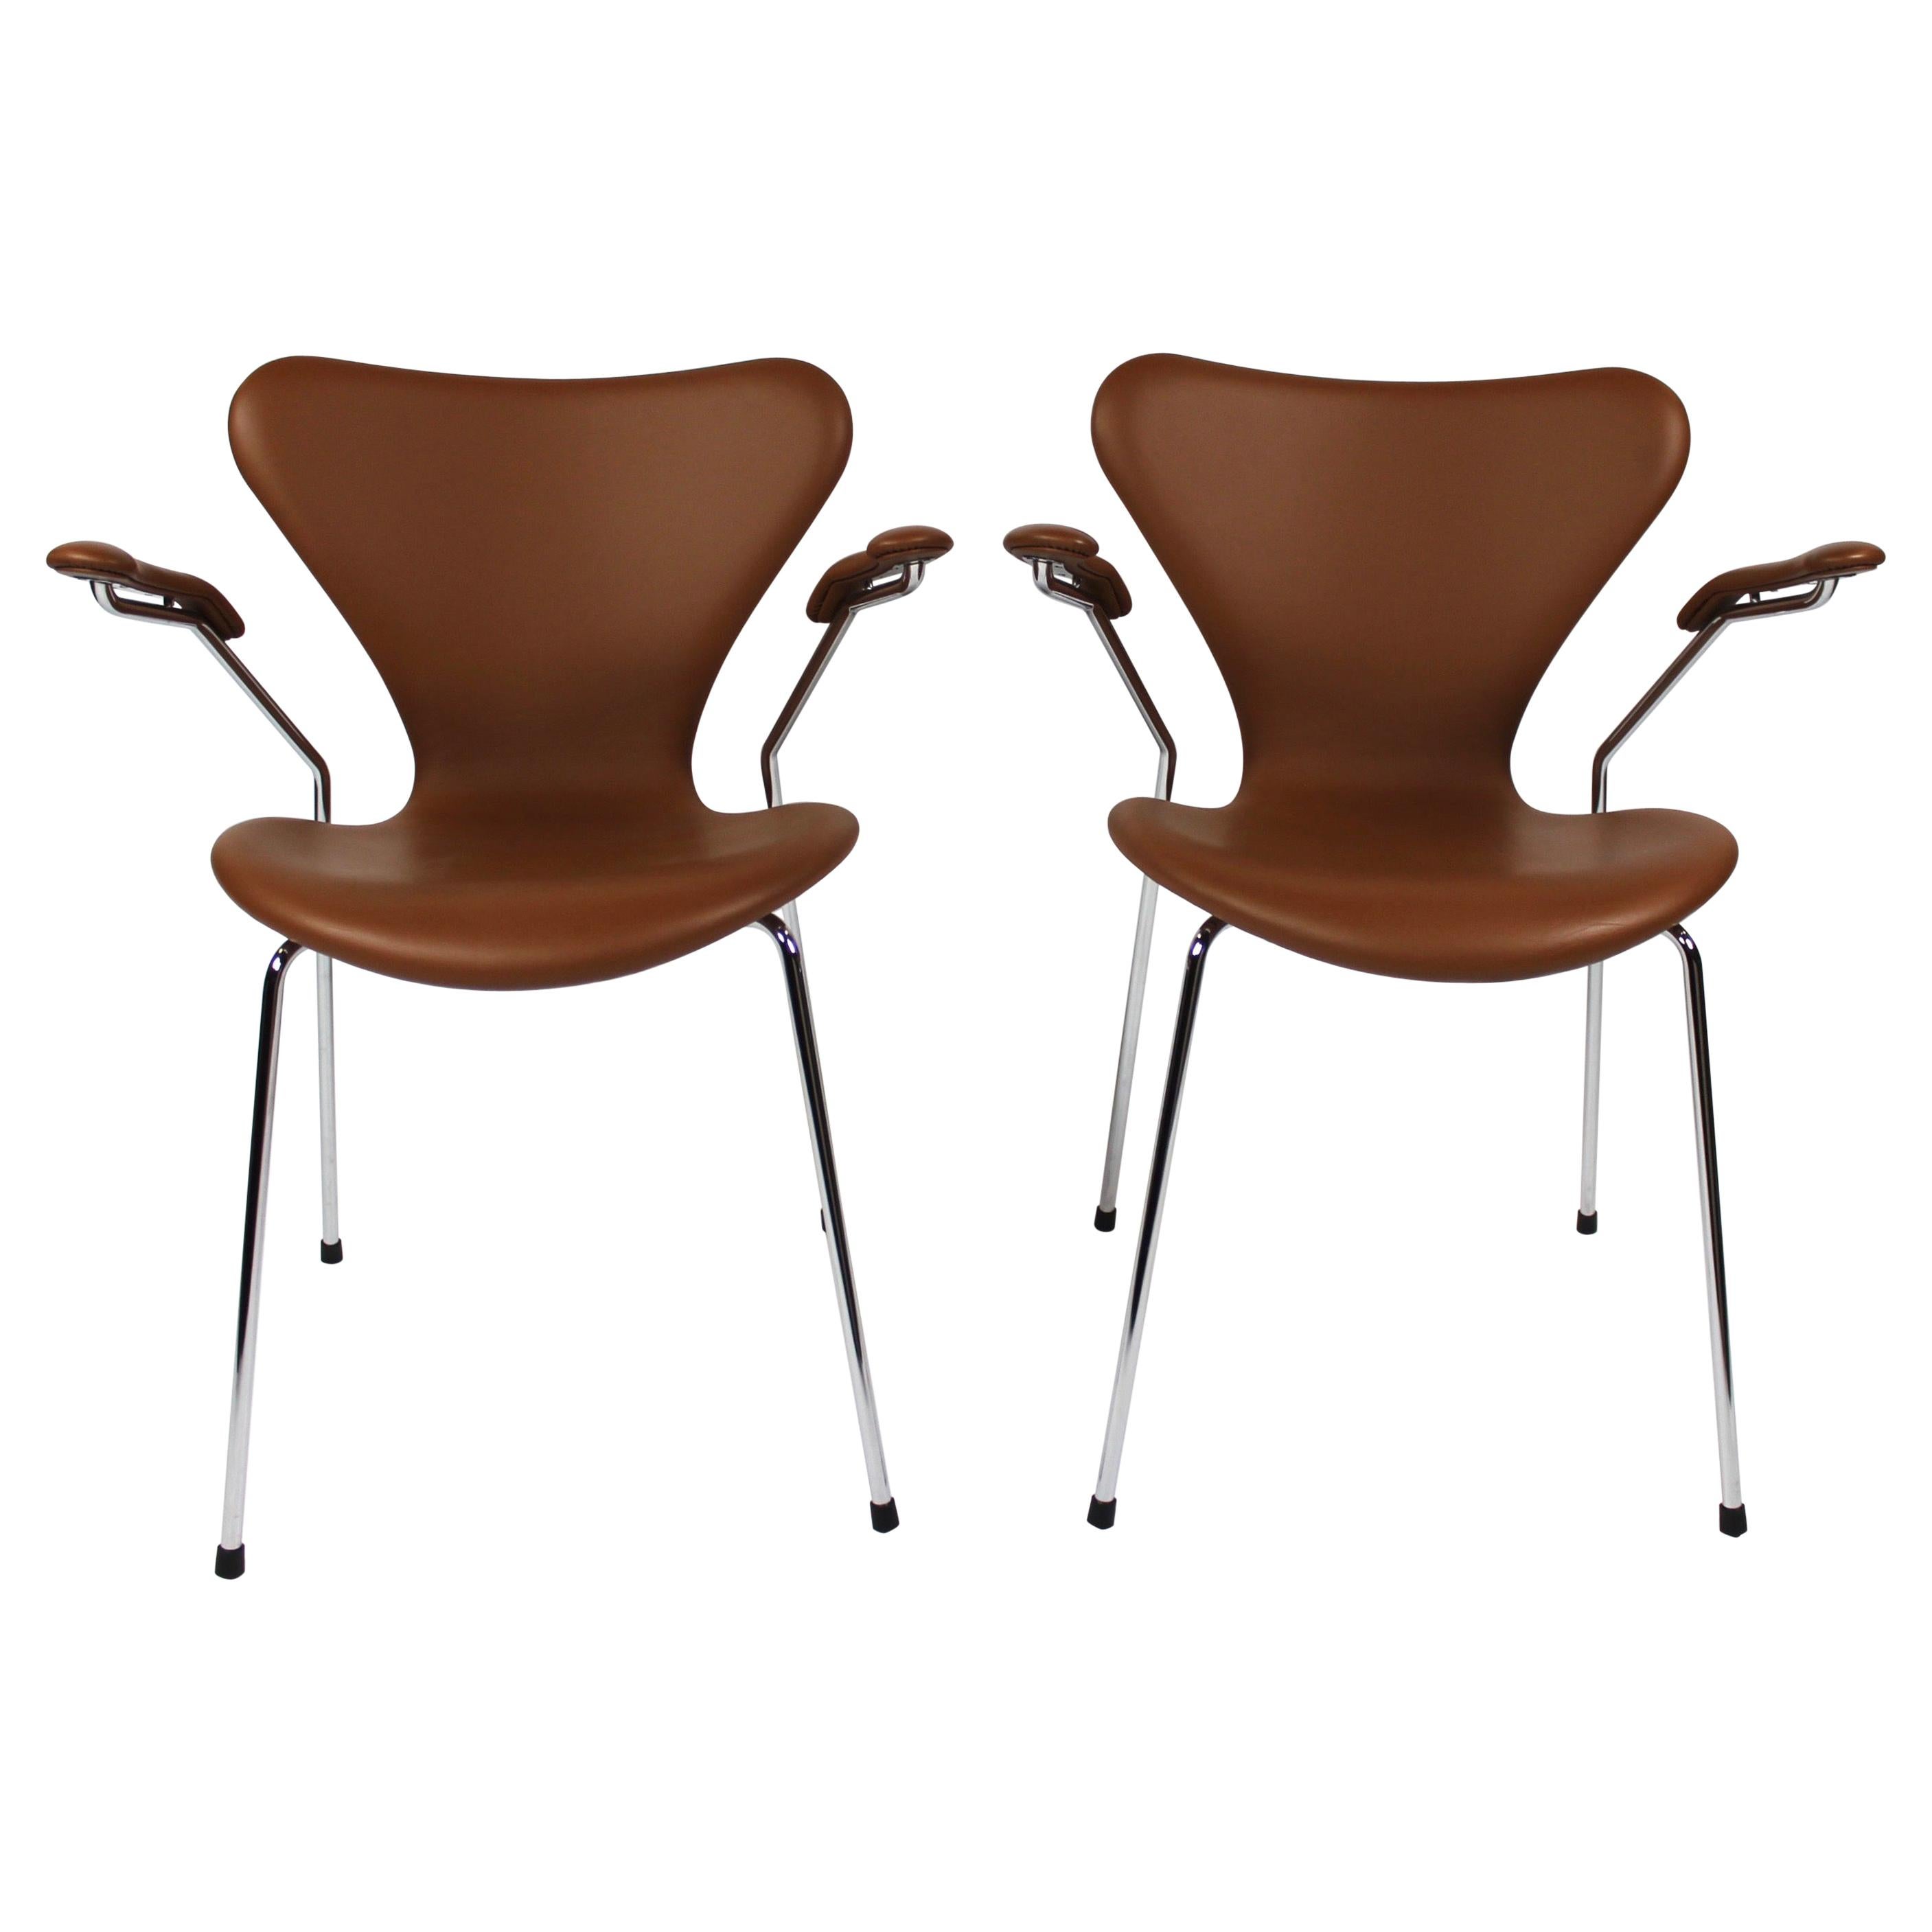 Set of Seven Chairs, Model 3207, with Armrests in Cognac Colored, 2019